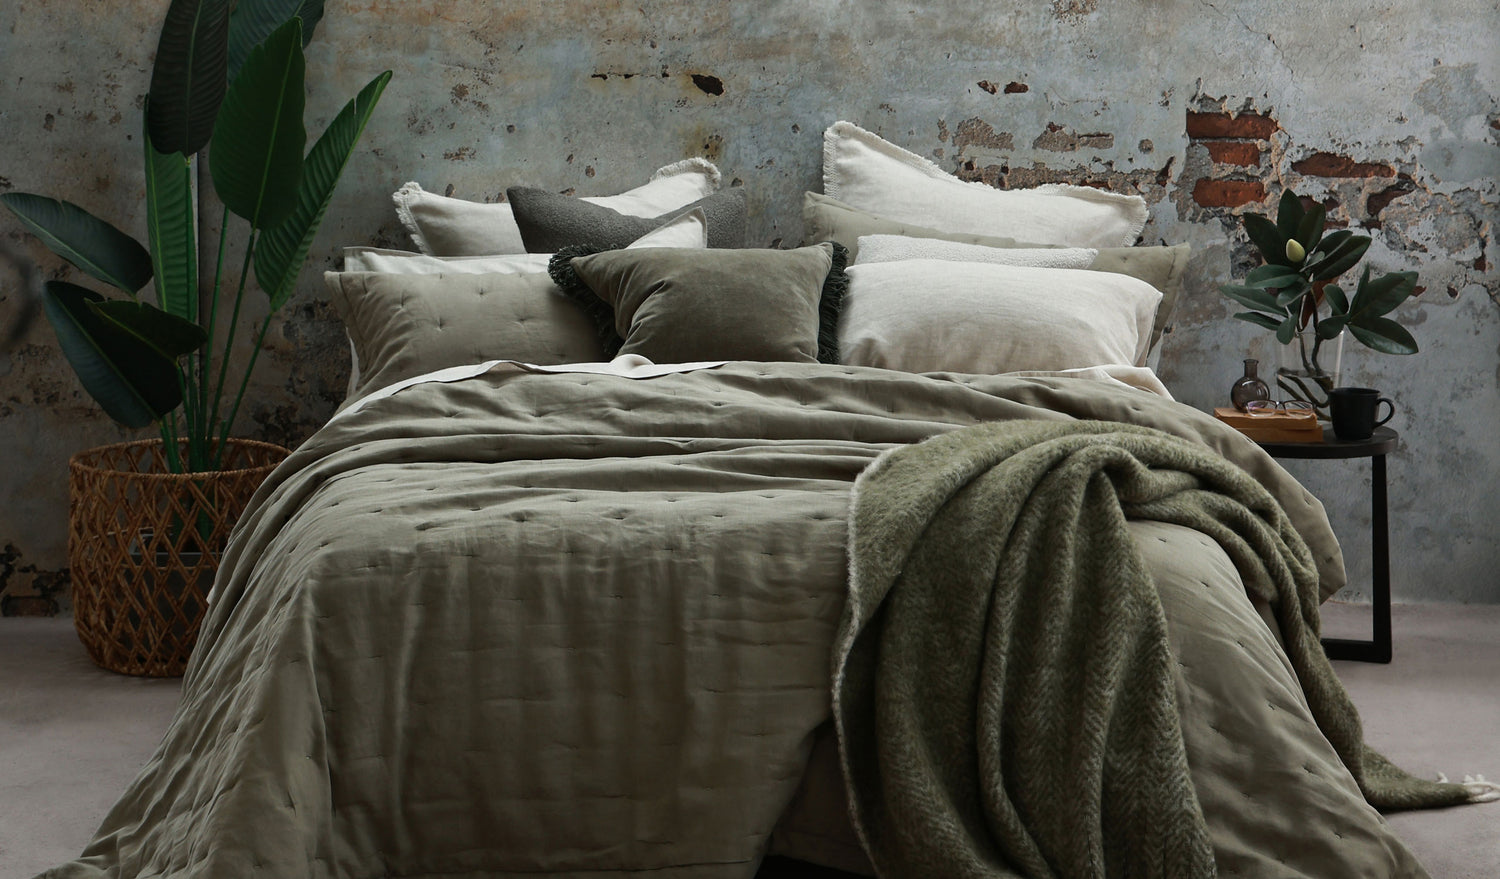 Discover our Laundered Linen Collection